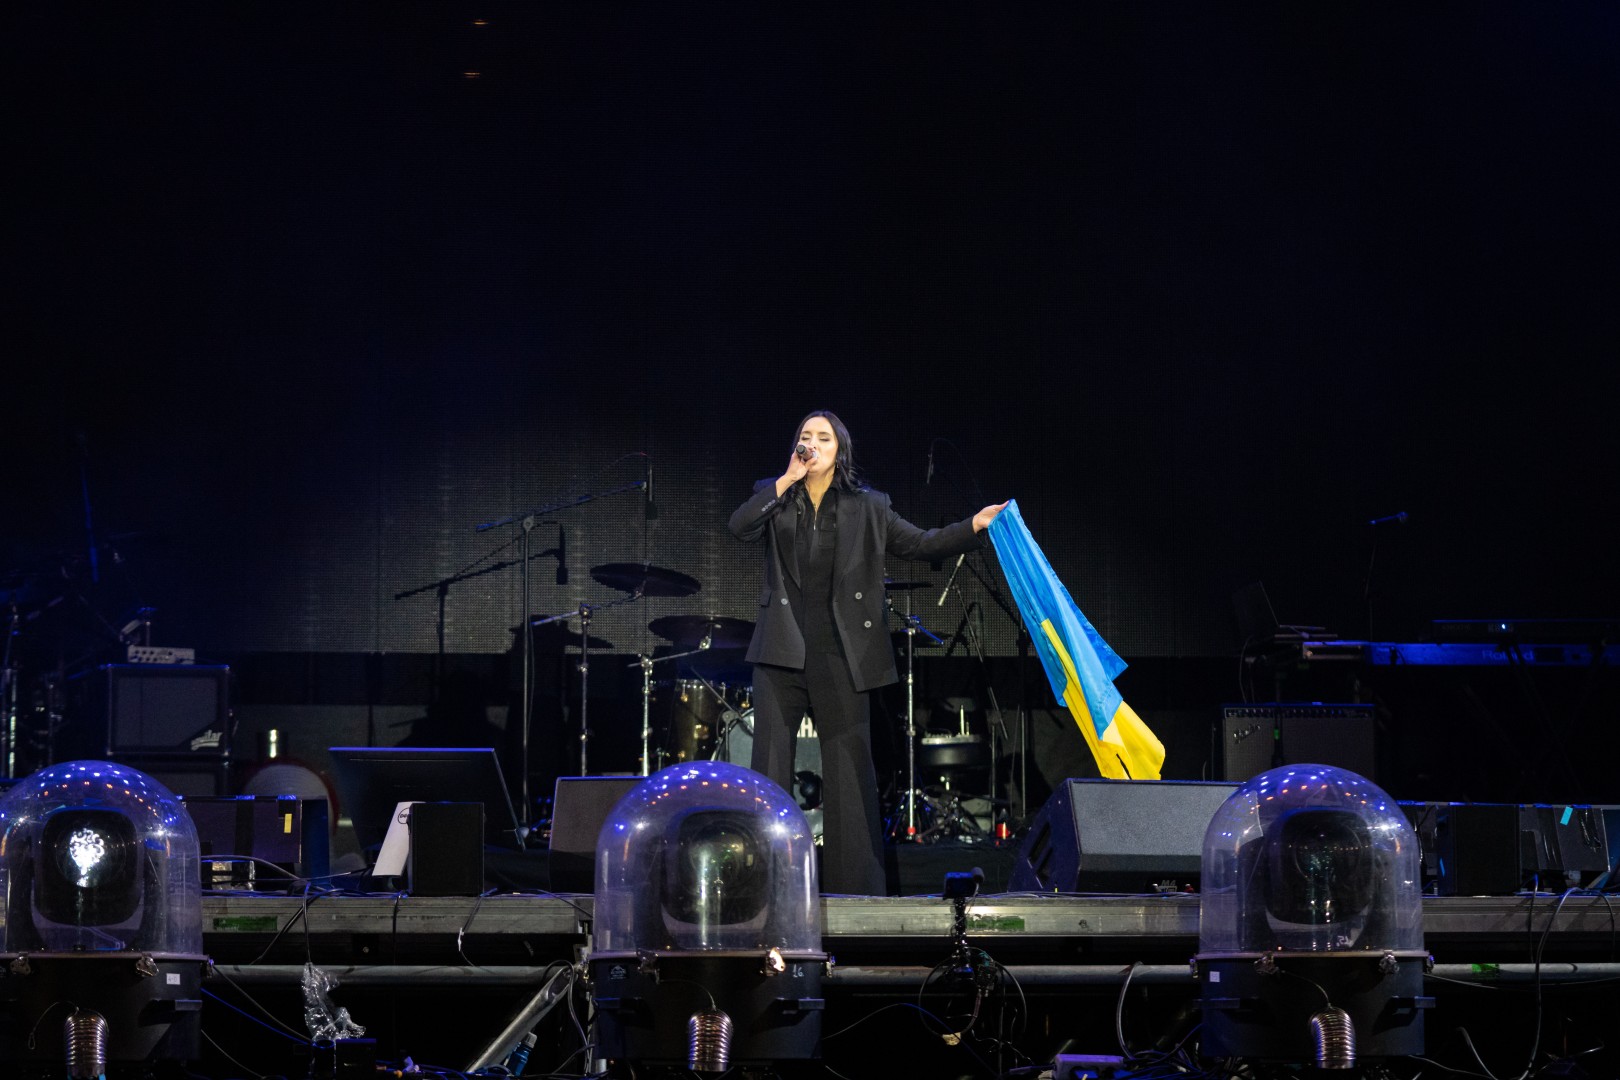 Jamala at National Arena in Bucharest on March 12, 2022 (9c0d9ee8cc)